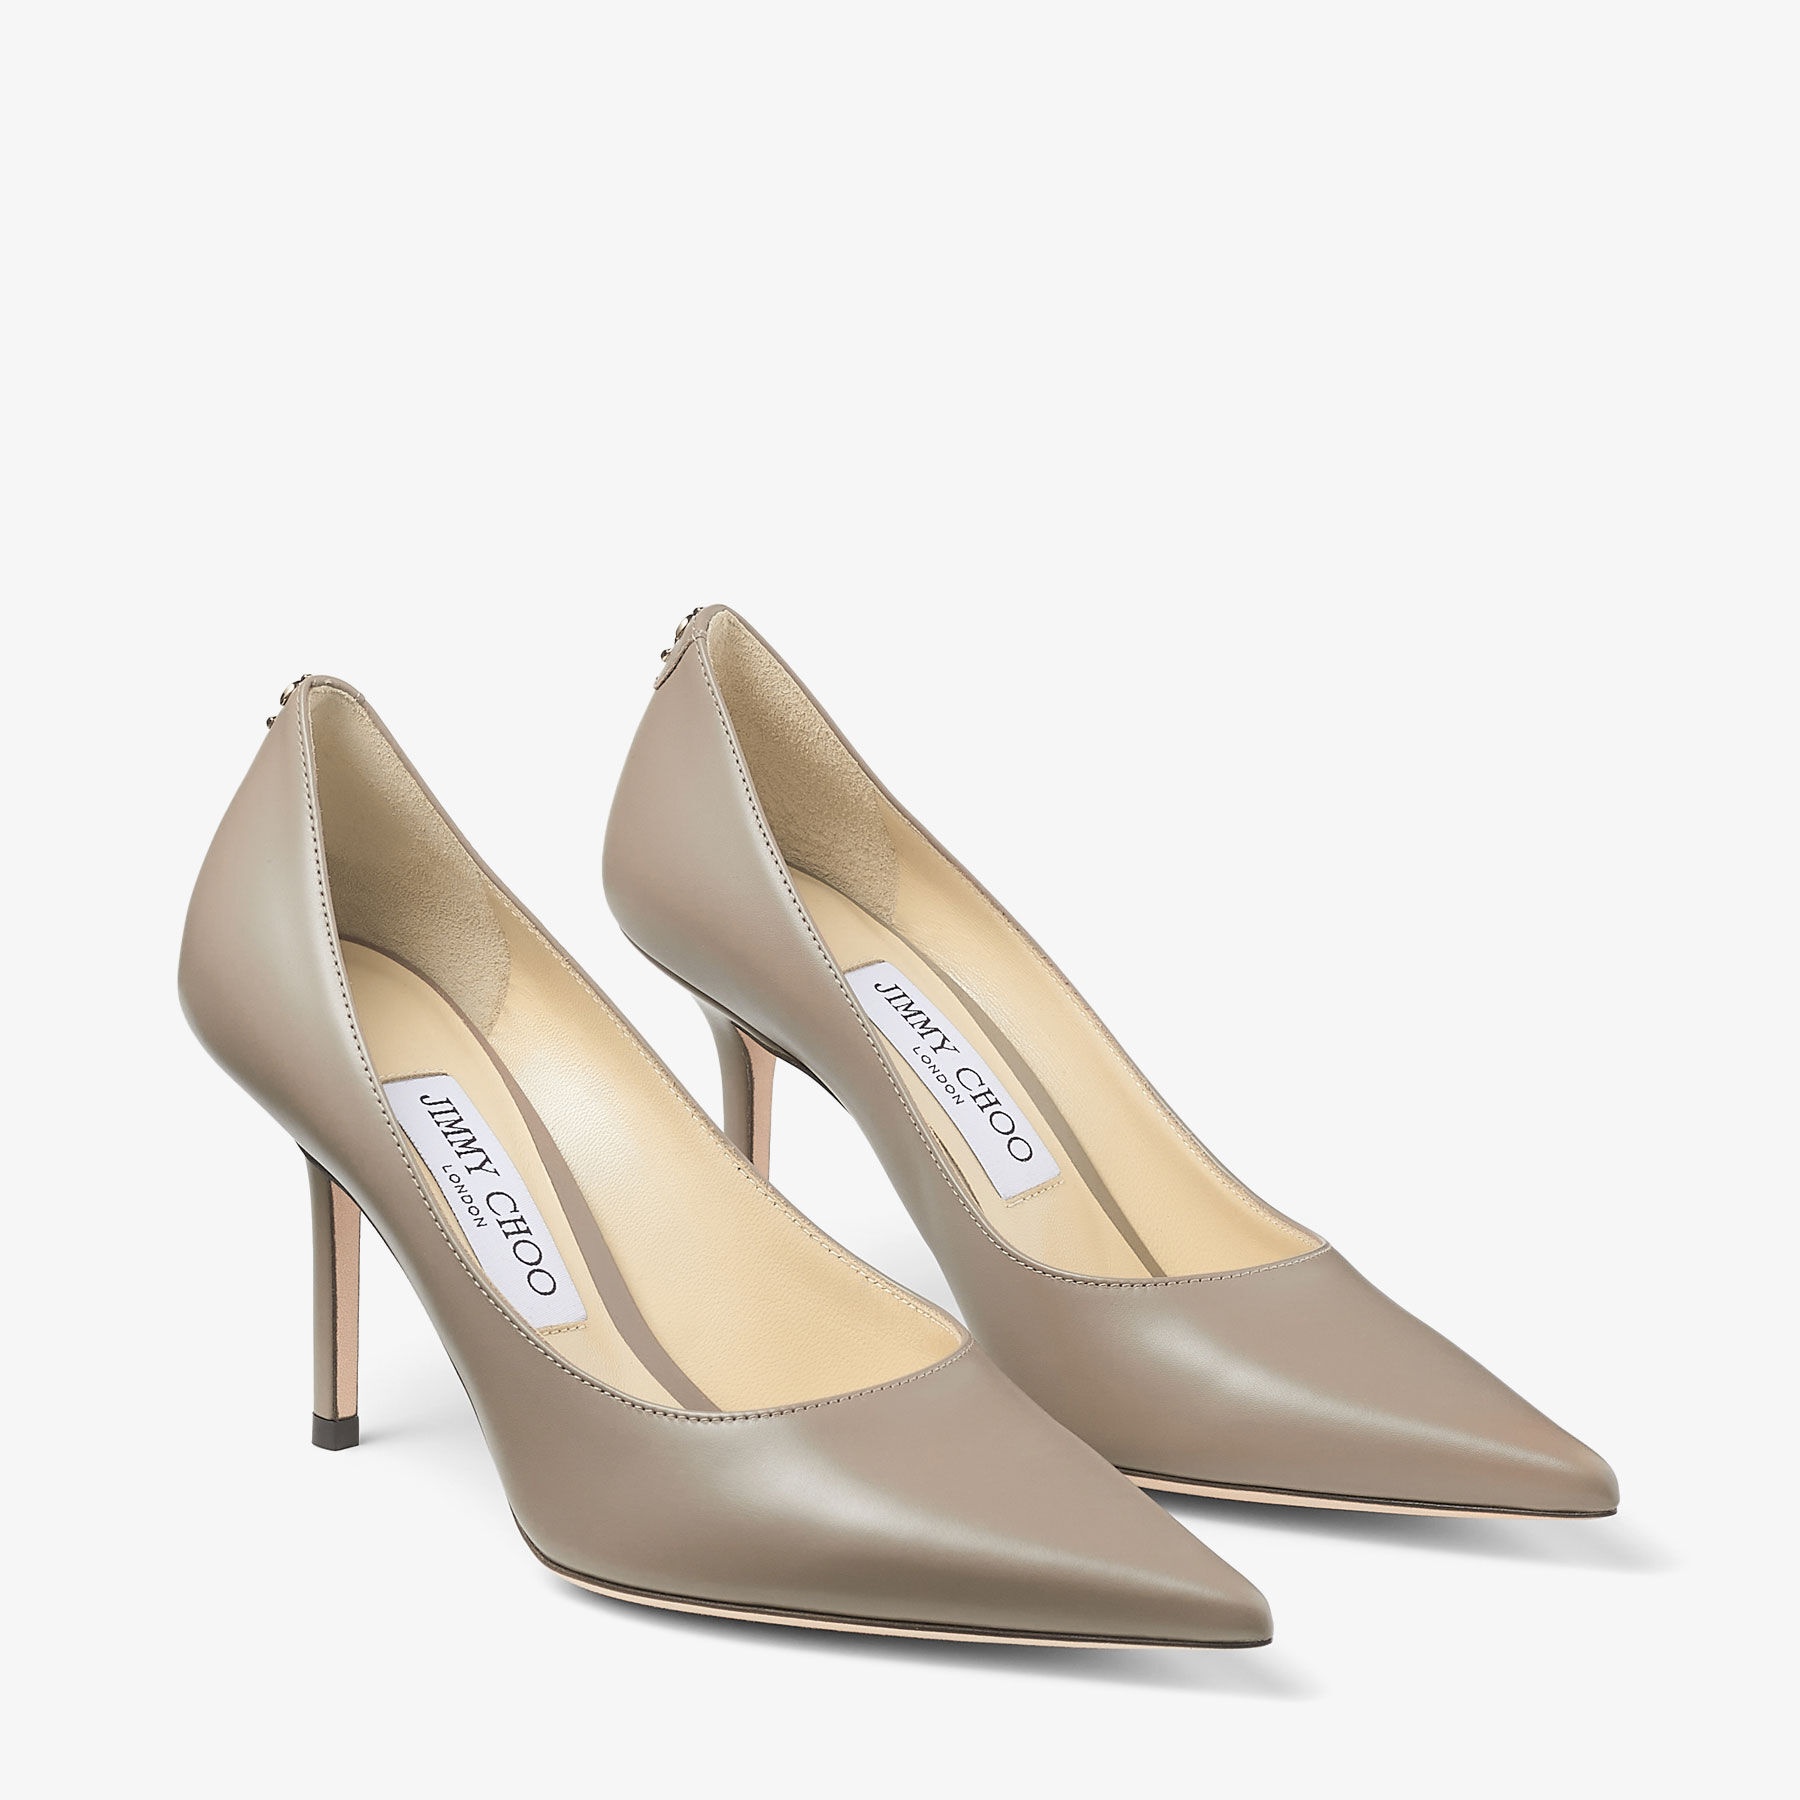 Love 85
Taupe Leather Pumps with JC Emblem - 3